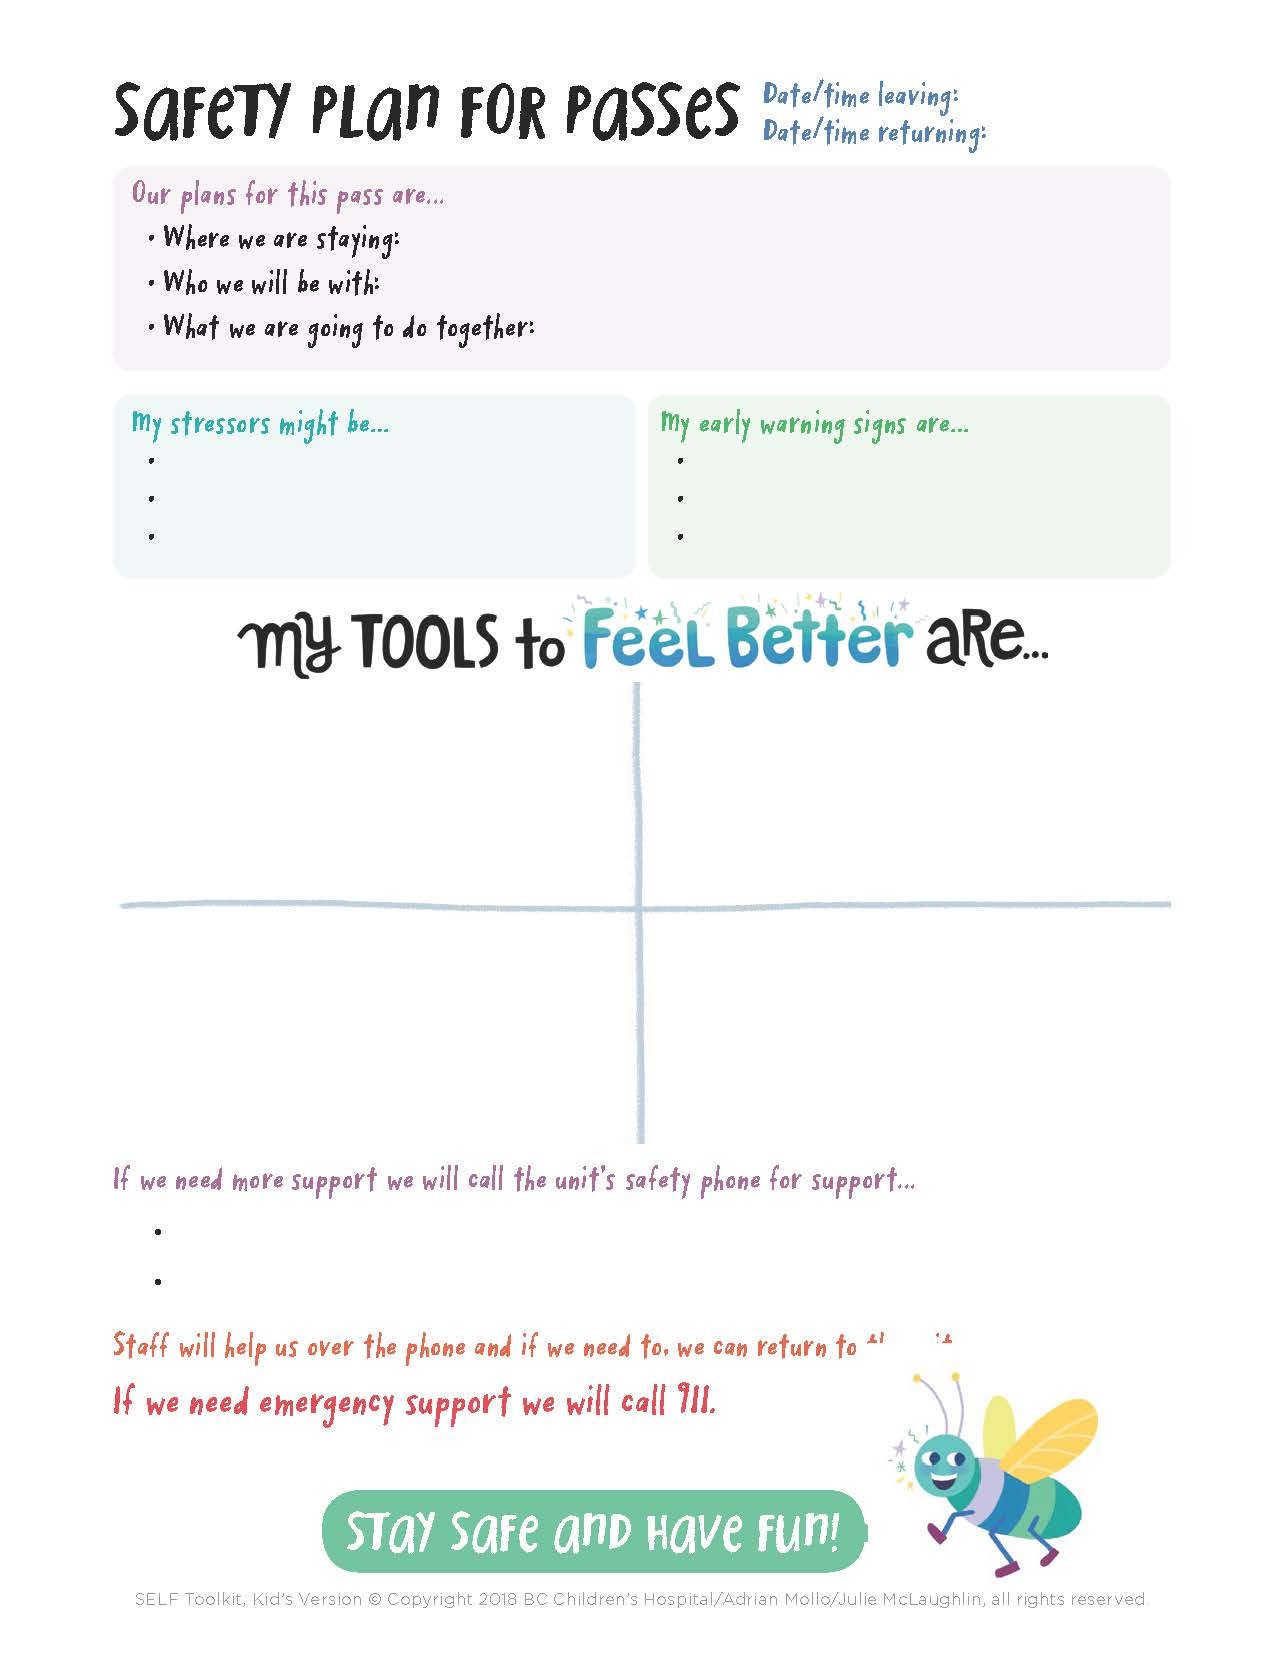 SELF Toolkit for Kids_Page_09.jpg